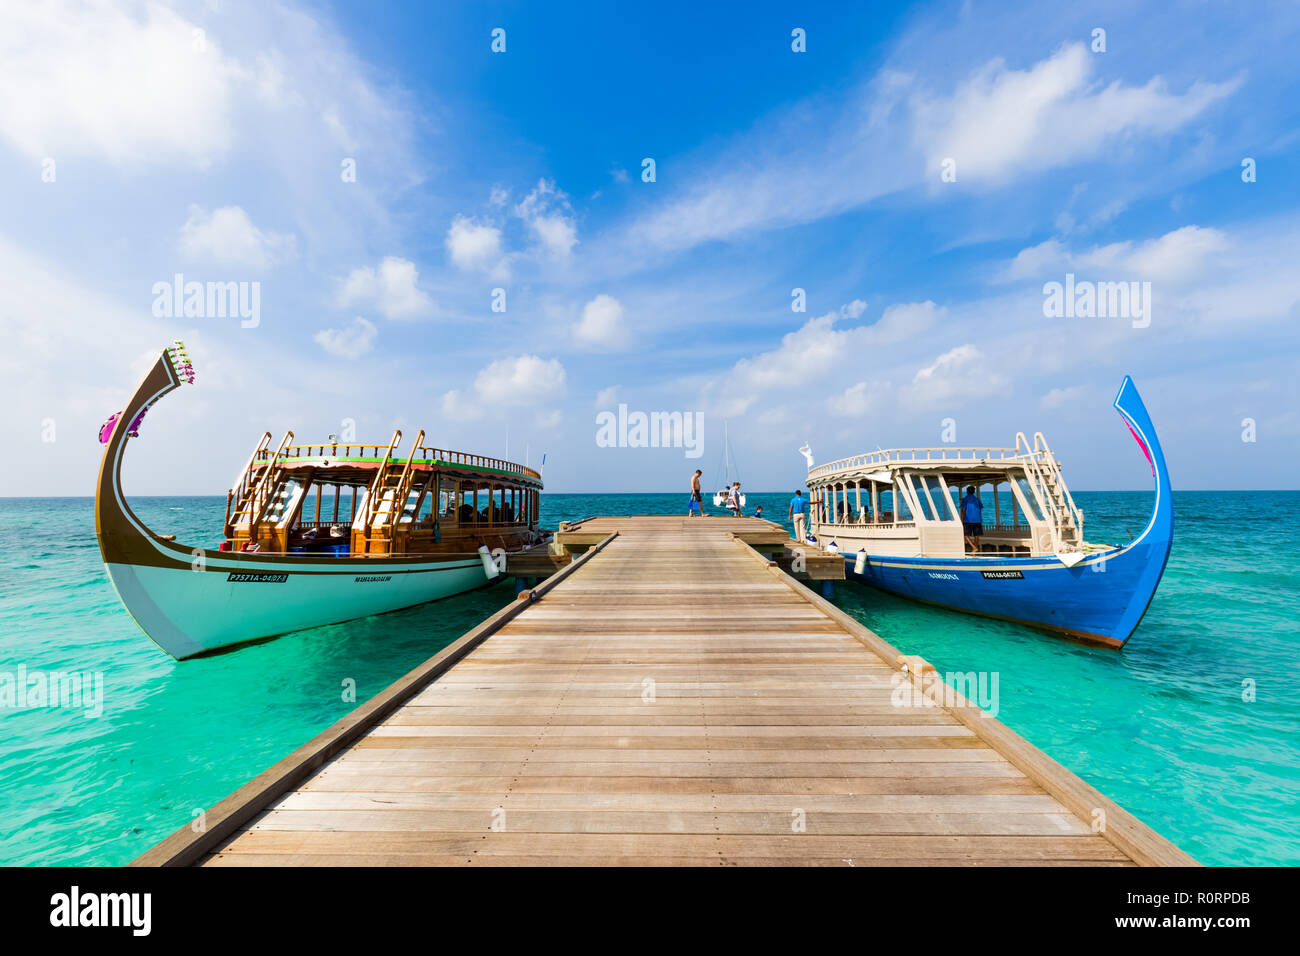 Wonderful Maldivian boats Dhoni on tropical blue sea at wooden jetty dock, taking tourist to snorkeling and diving to see underwater wildlife Stock Photo